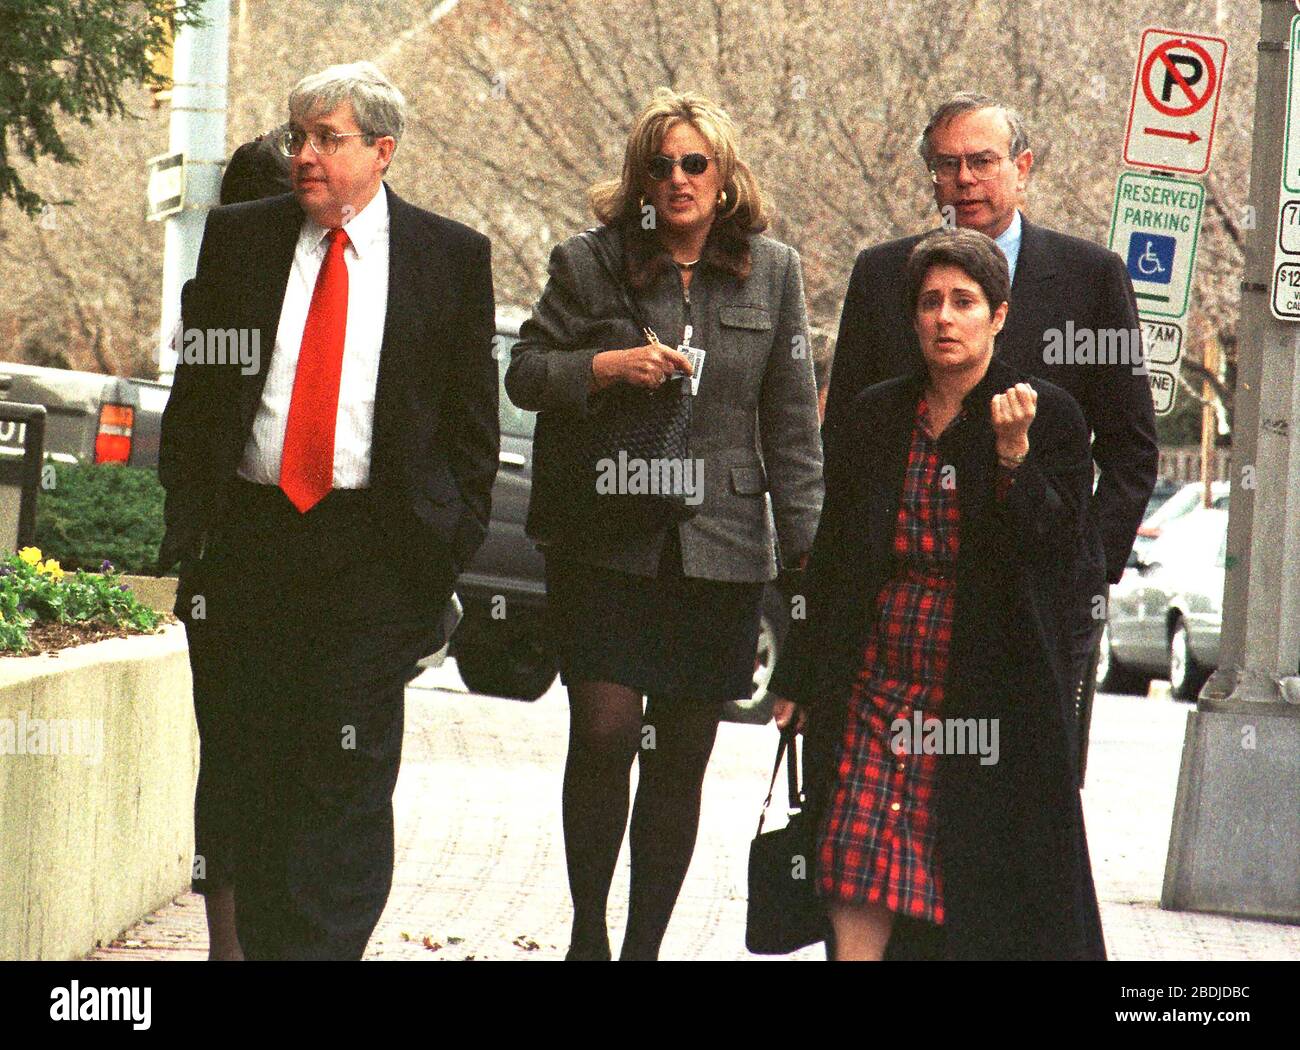 Arlington, VA - March 3, 1999 -- Linda Tripp (wearing a gray jacket) with unidentified people on Wilson Blvd in front of the building where she now works on 3 March, 1999.Credit: Ron Sachs/CNP (RESTRICTION: NO New York or New Jersey Newspapers or newspapers within a 75 mile radius of New York City) | usage worldwide Stock Photo